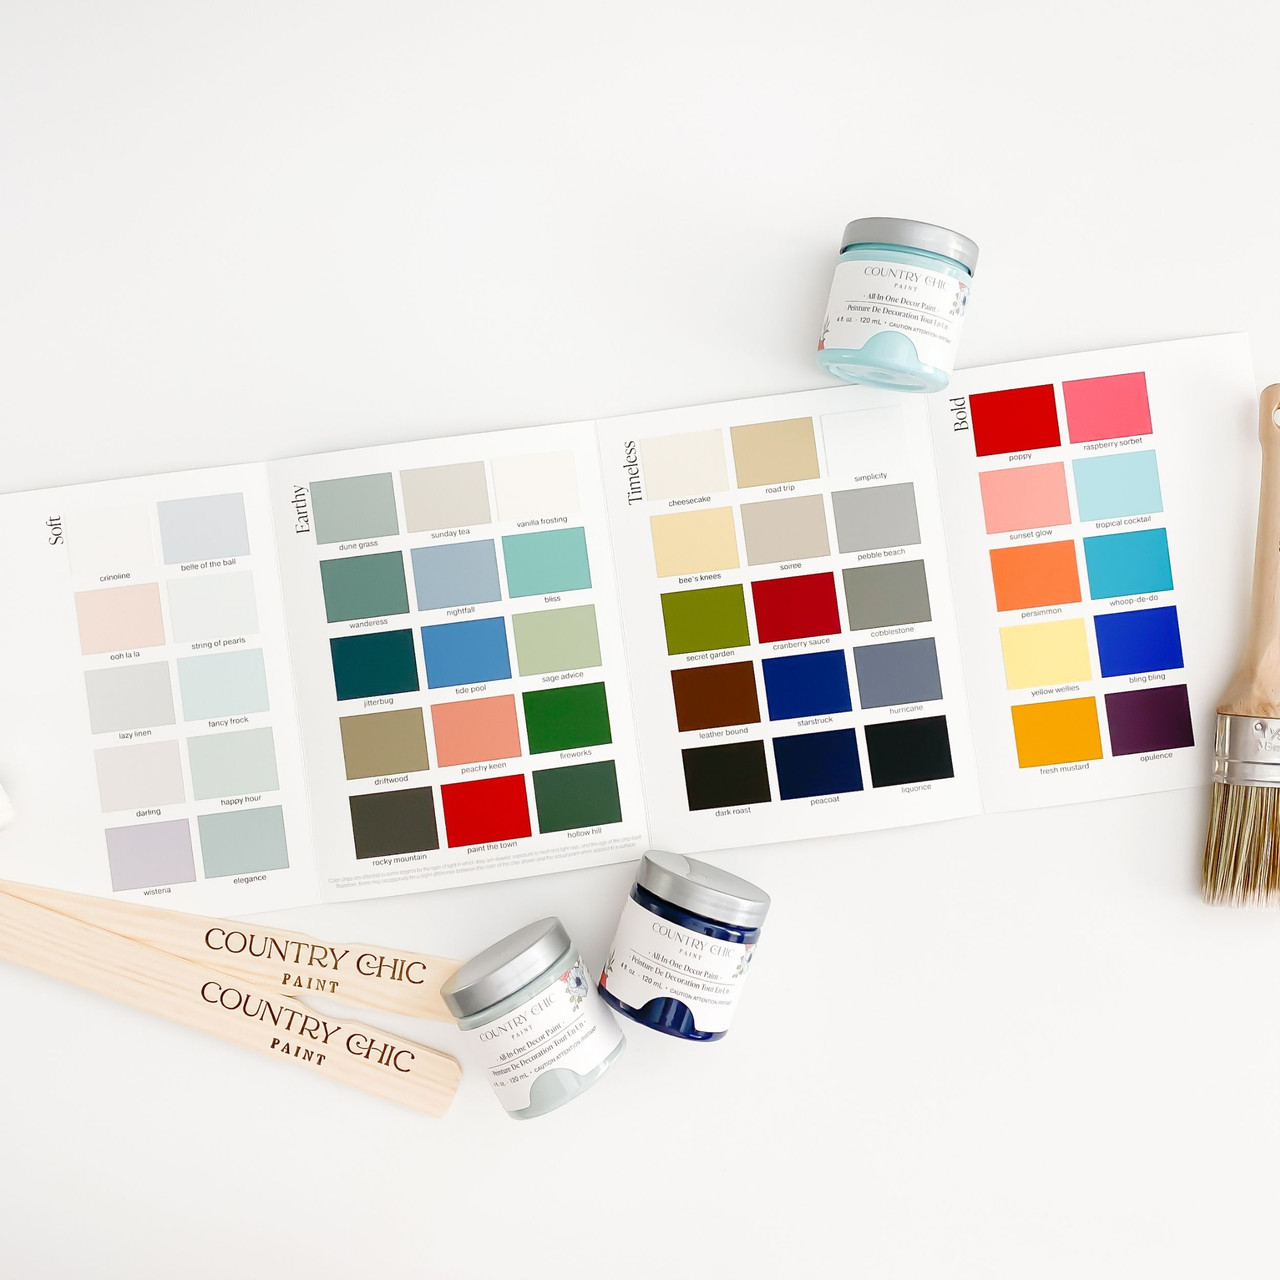 Oscuro cáscara Asimilar Paint Color Card - Swatches of All 50 Furniture Paint Colors - Country Chic  Paint